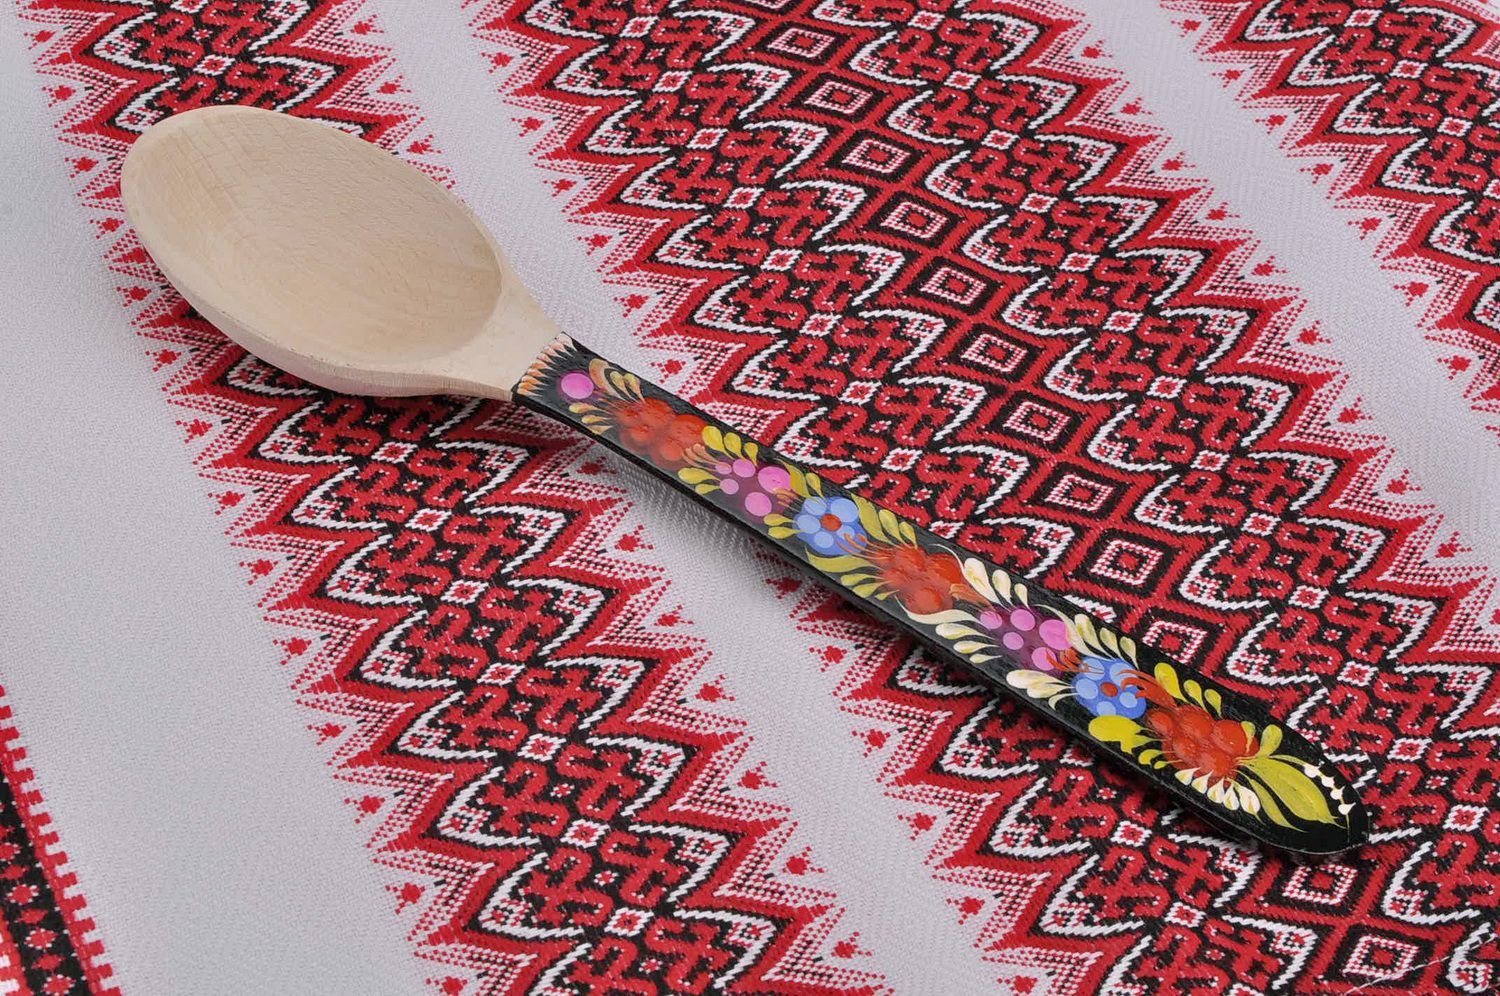 Spoon with painted handle photo 5